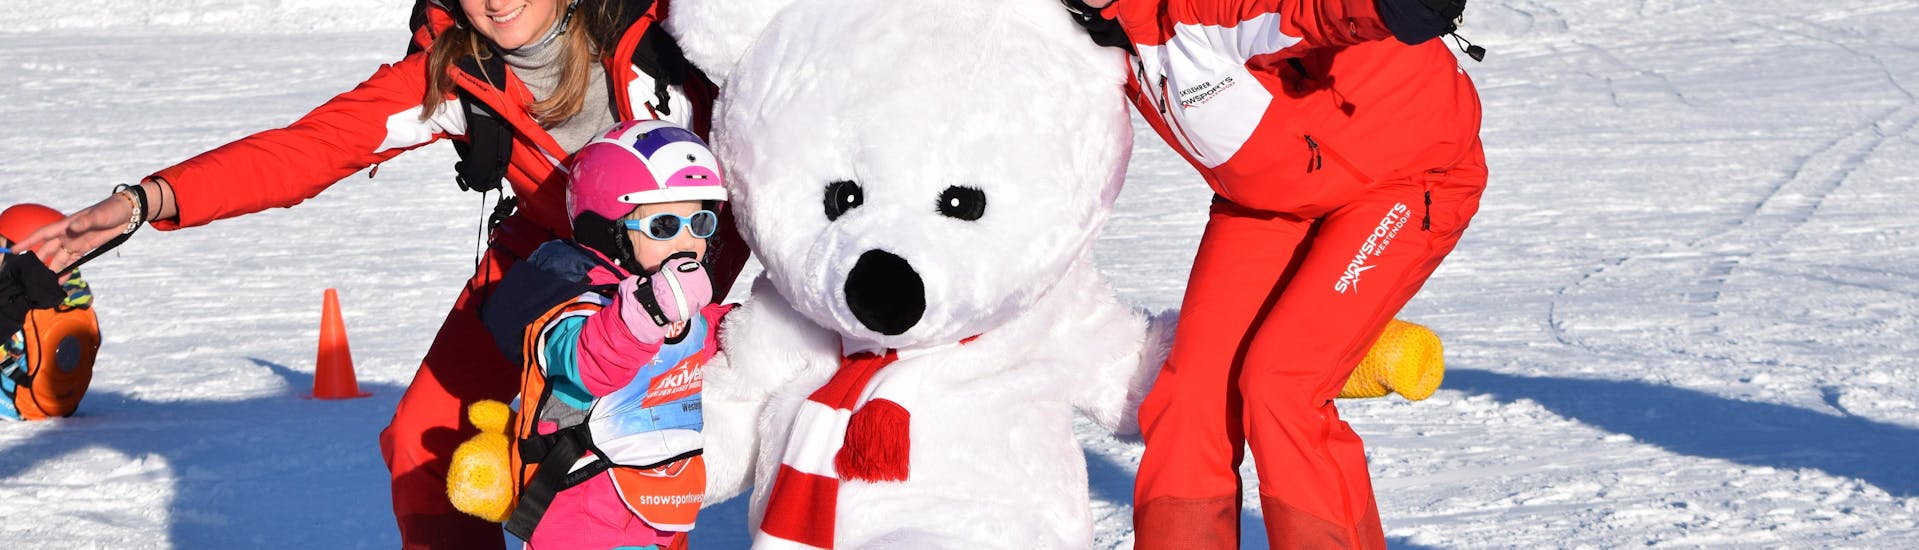 Two ski instructors, a child and Billy the polar bear during Kids Ski Lessons "Bambini" (3-4 y.) for All Levels with ski school Snowsports Westendorf.